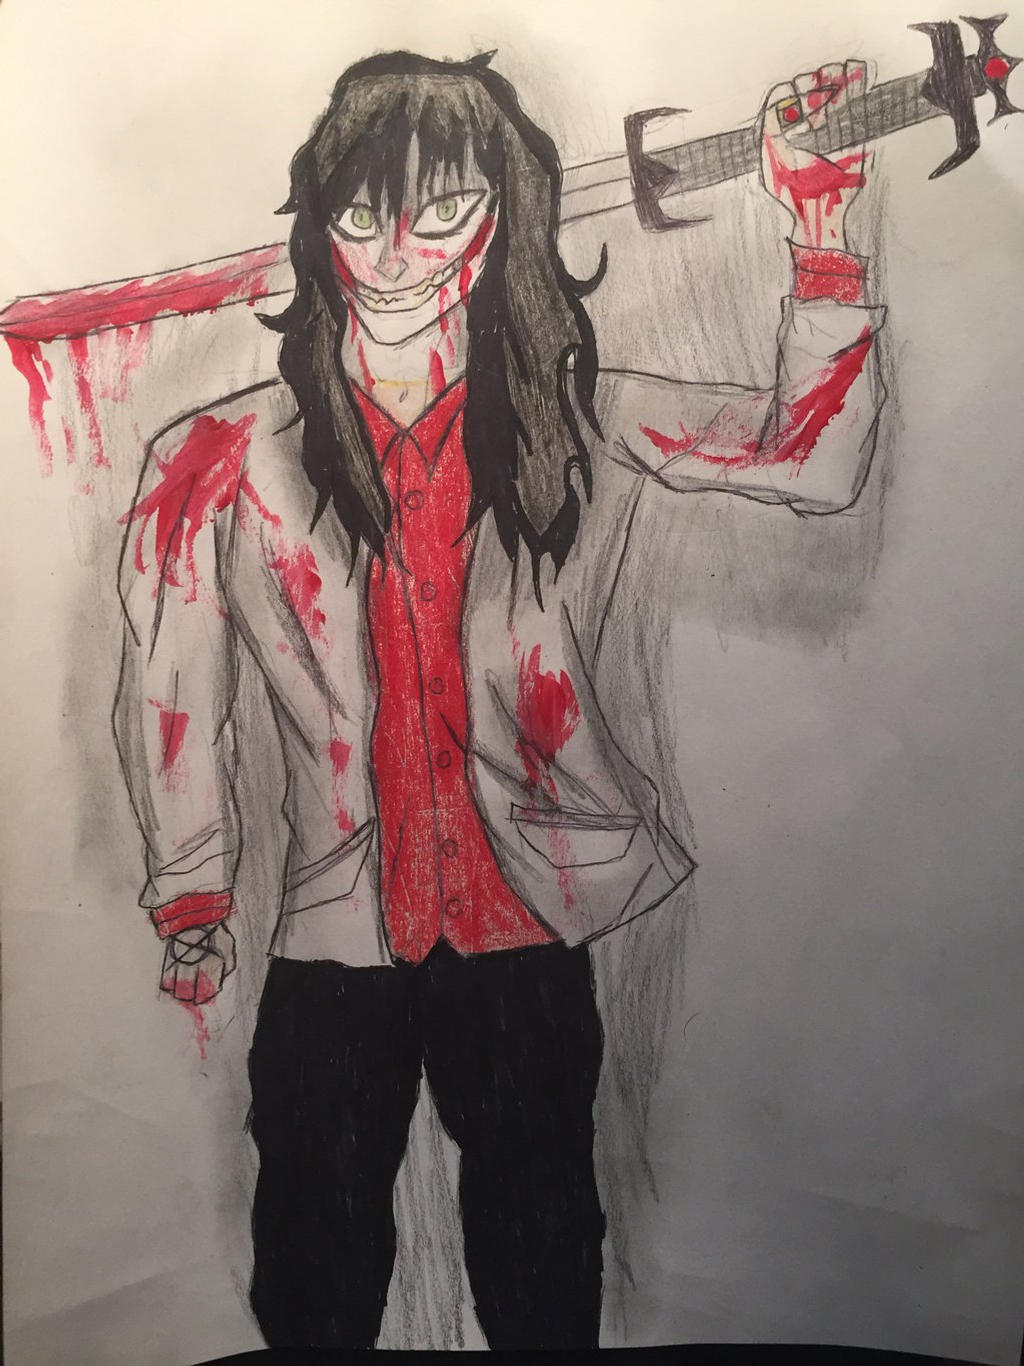 ChrisLopez1120 on X: My art of Jeff the Killer. This is my